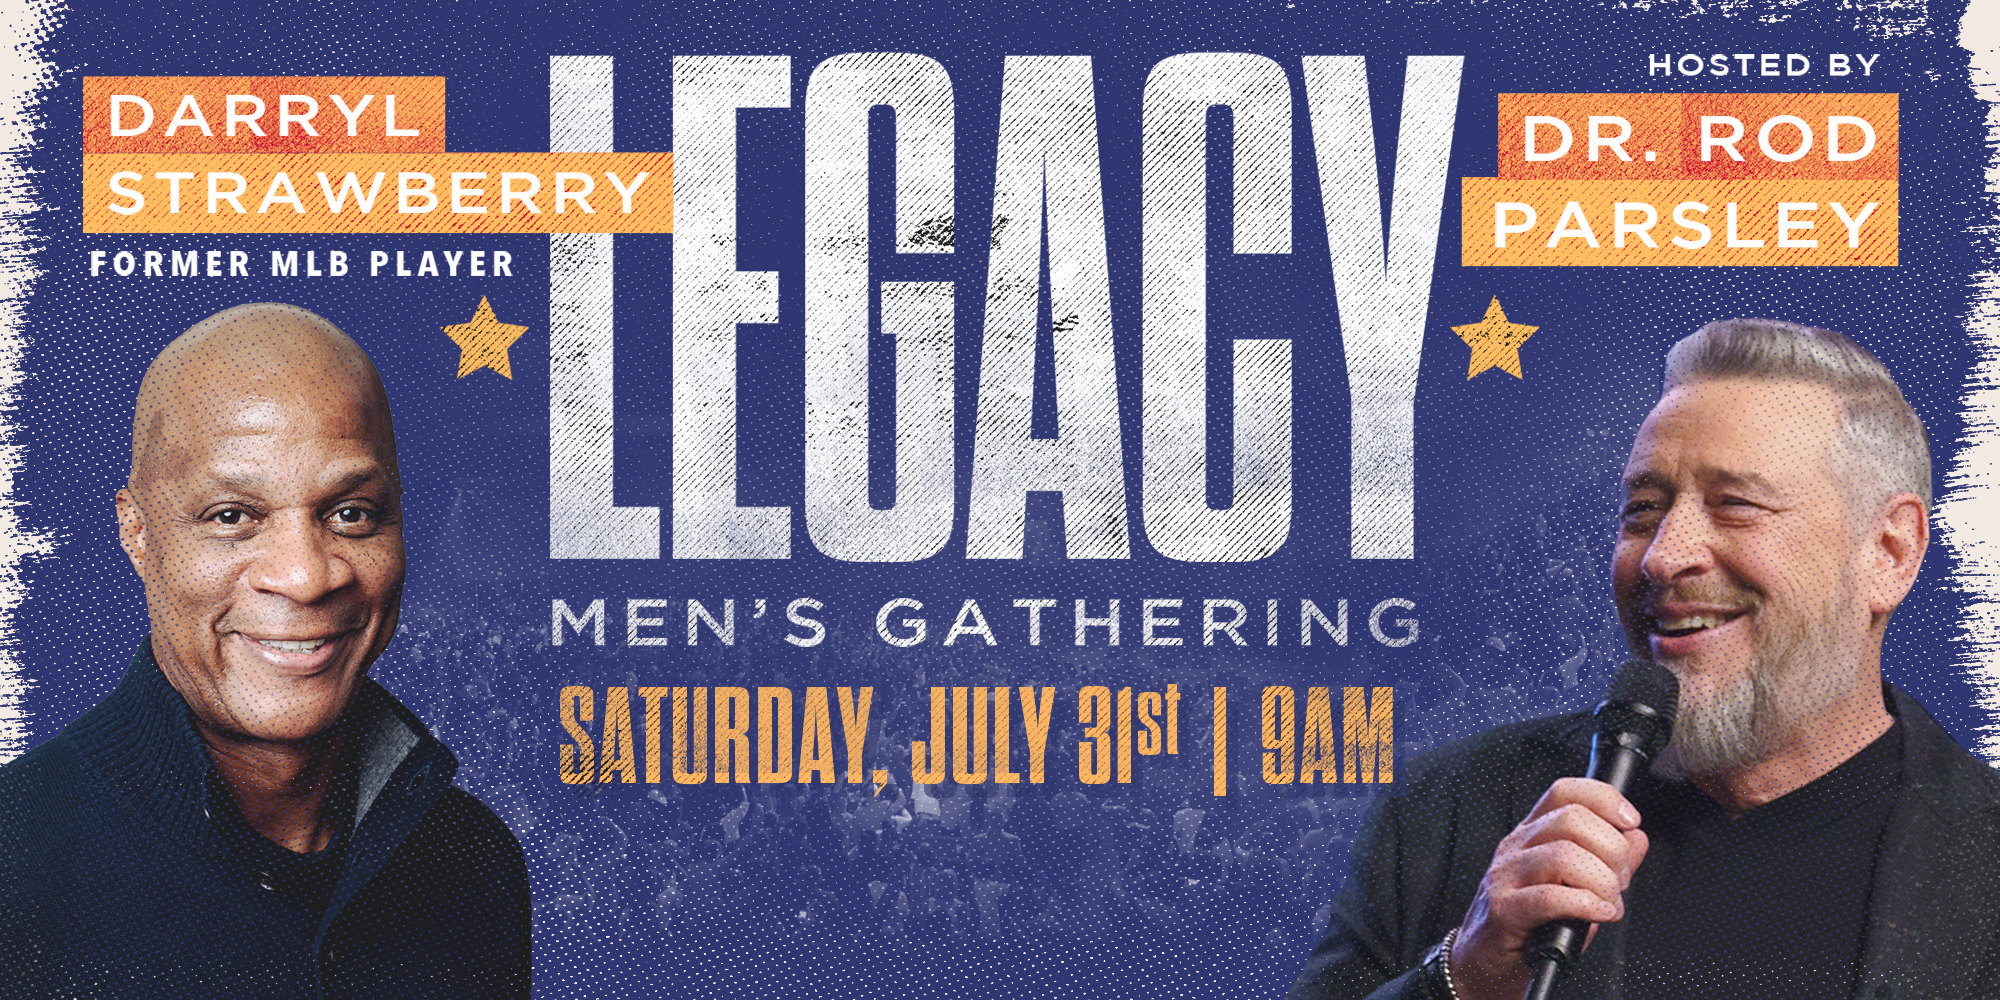 Darryl Strawberry Former MLB Player Hosted By Dr. Rod Parsley Legacy Mens Gathering Saturday, July 31st 9AM